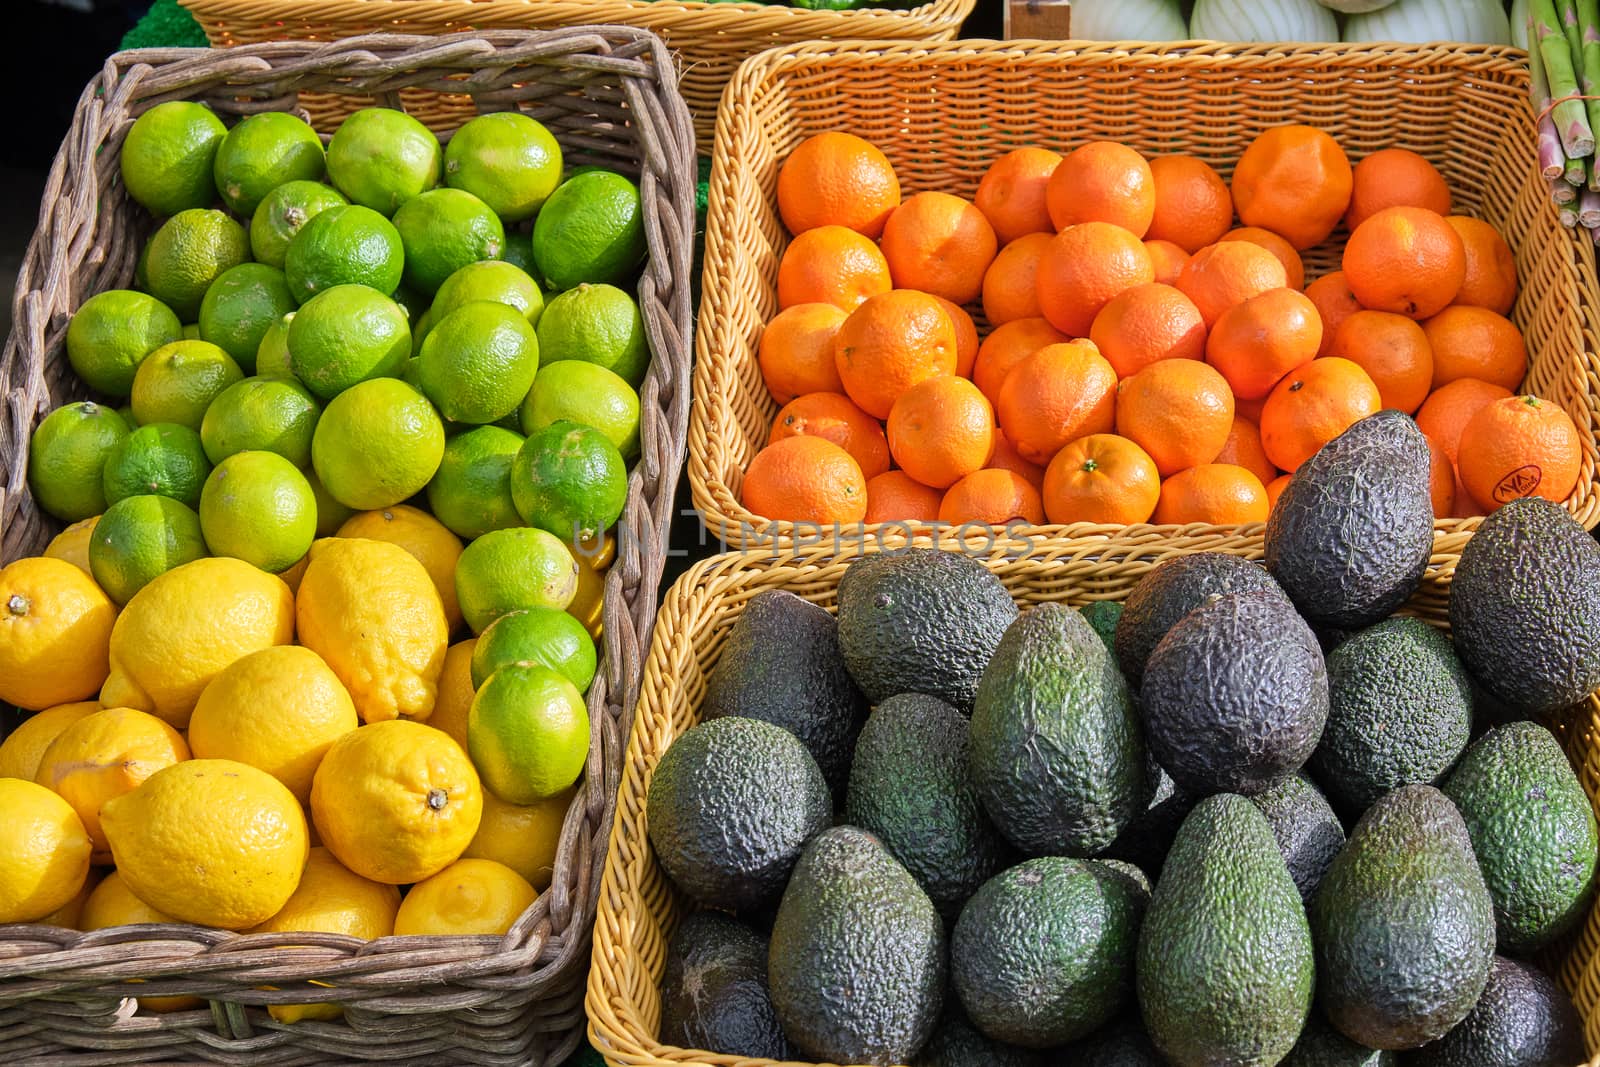 Avocados, lemons, limes and tangerines for sale at a market